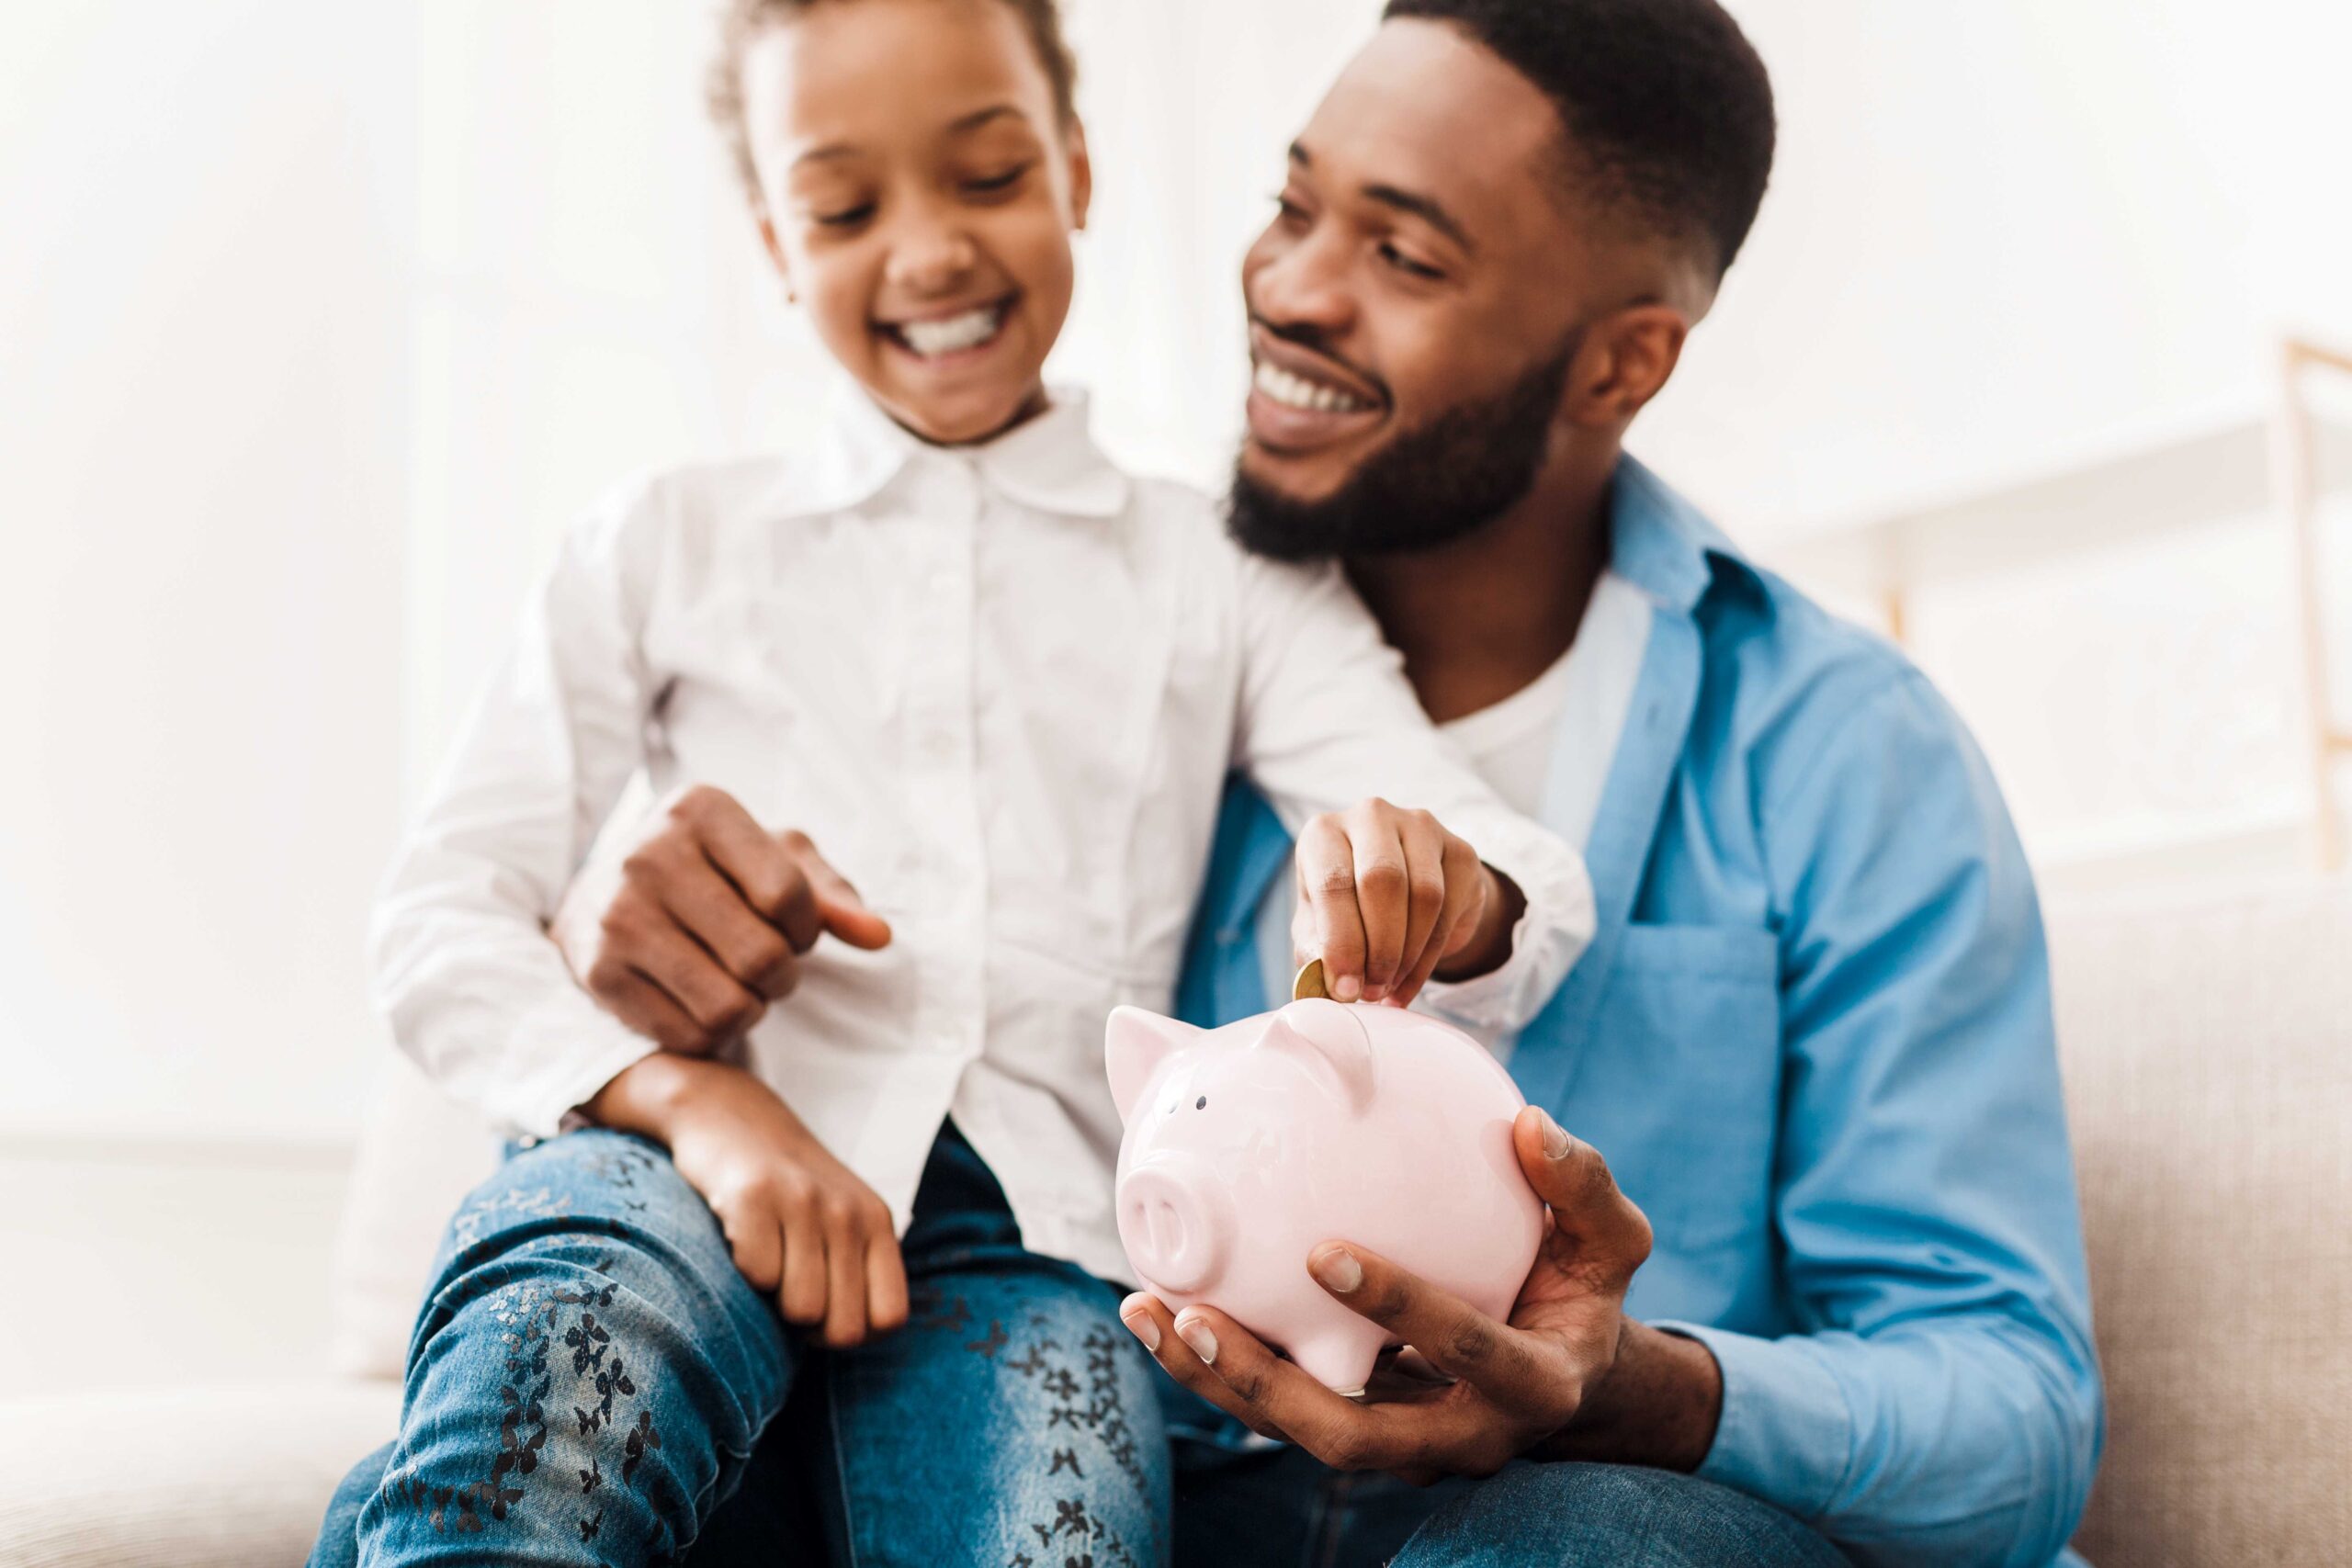 A man holding a young girl who is placing coins into a pink piggy bank.